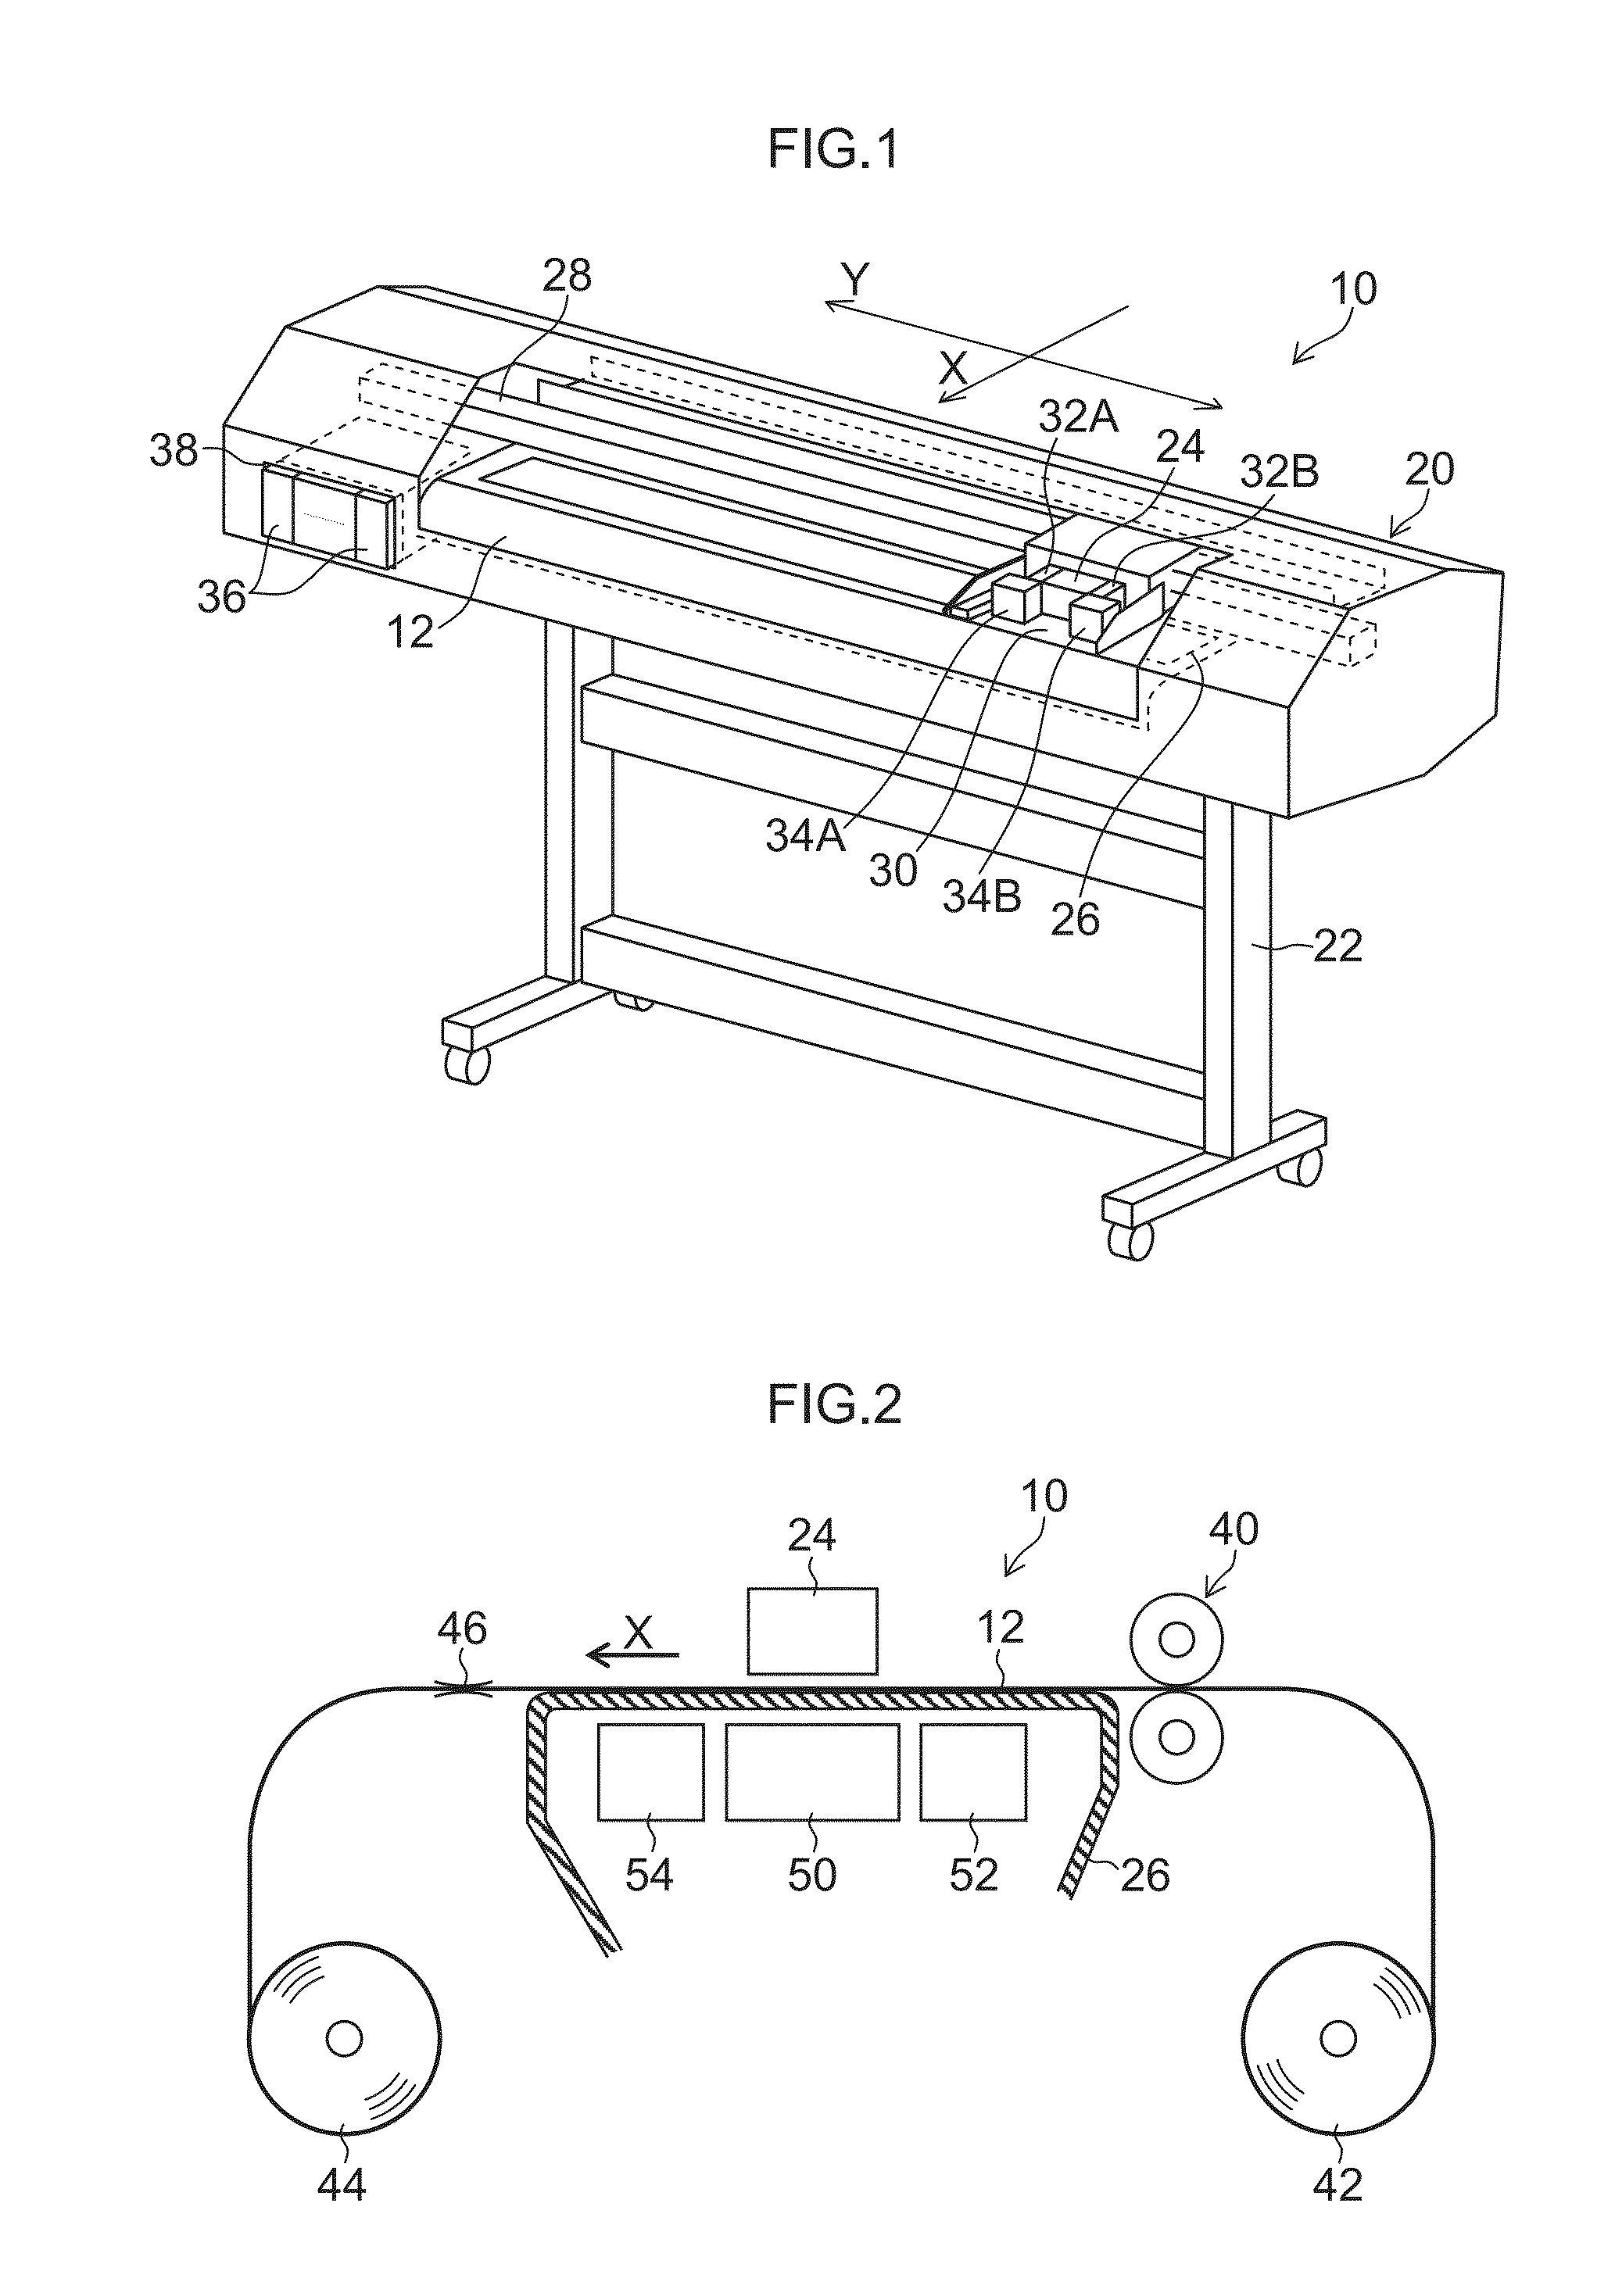 Dither mask generation method and device